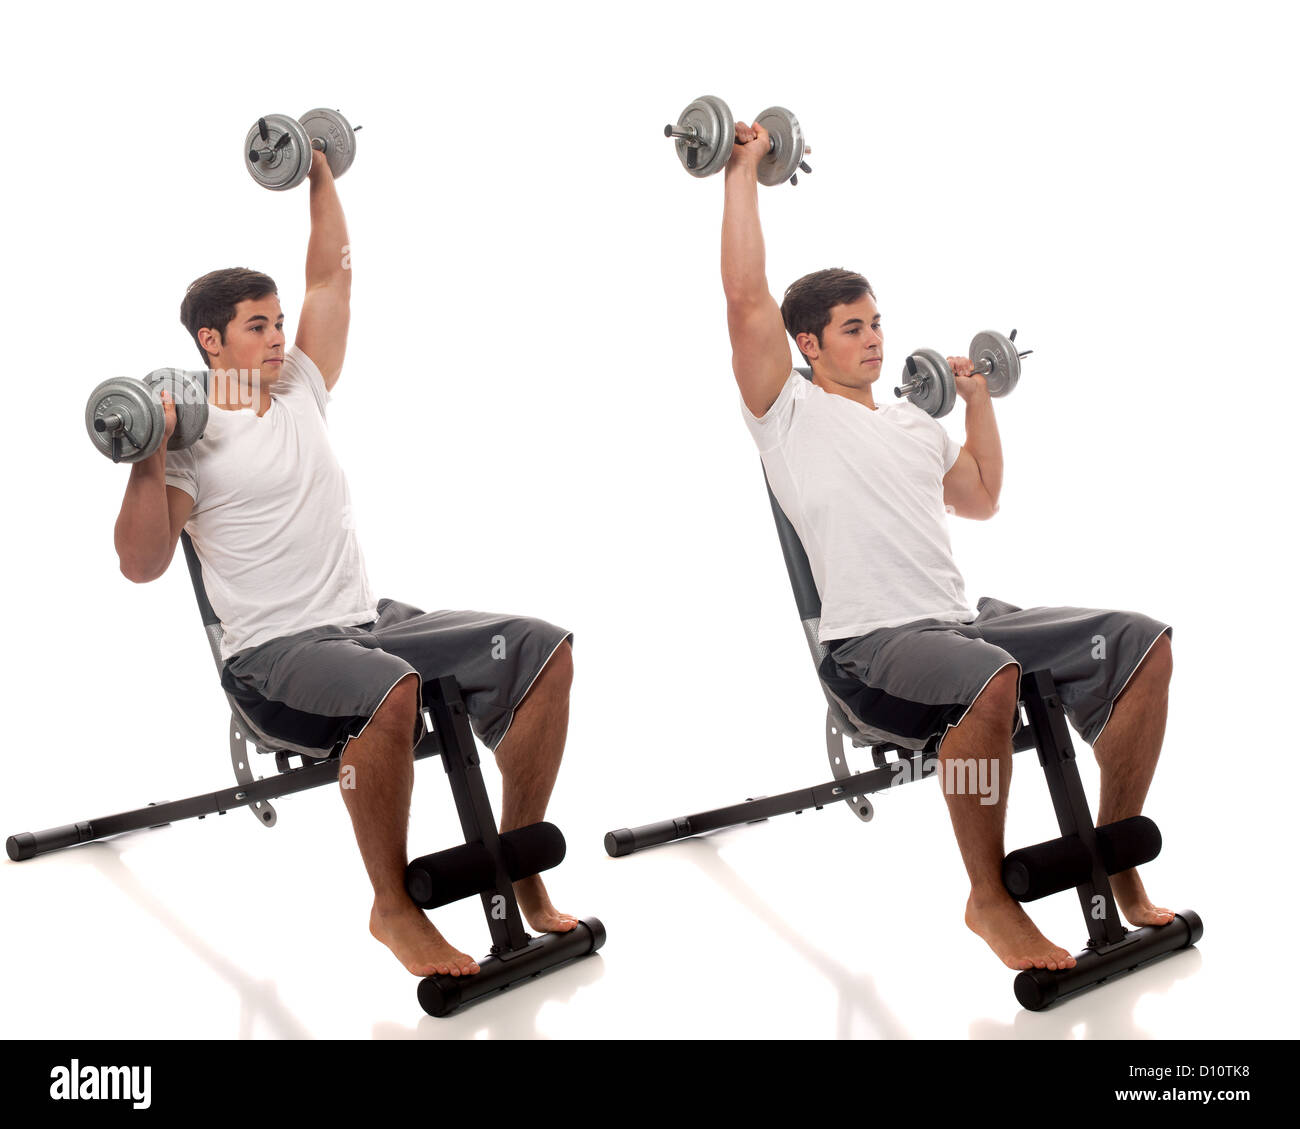 Young man lifting weights. Studio shot over white. Stock Photo